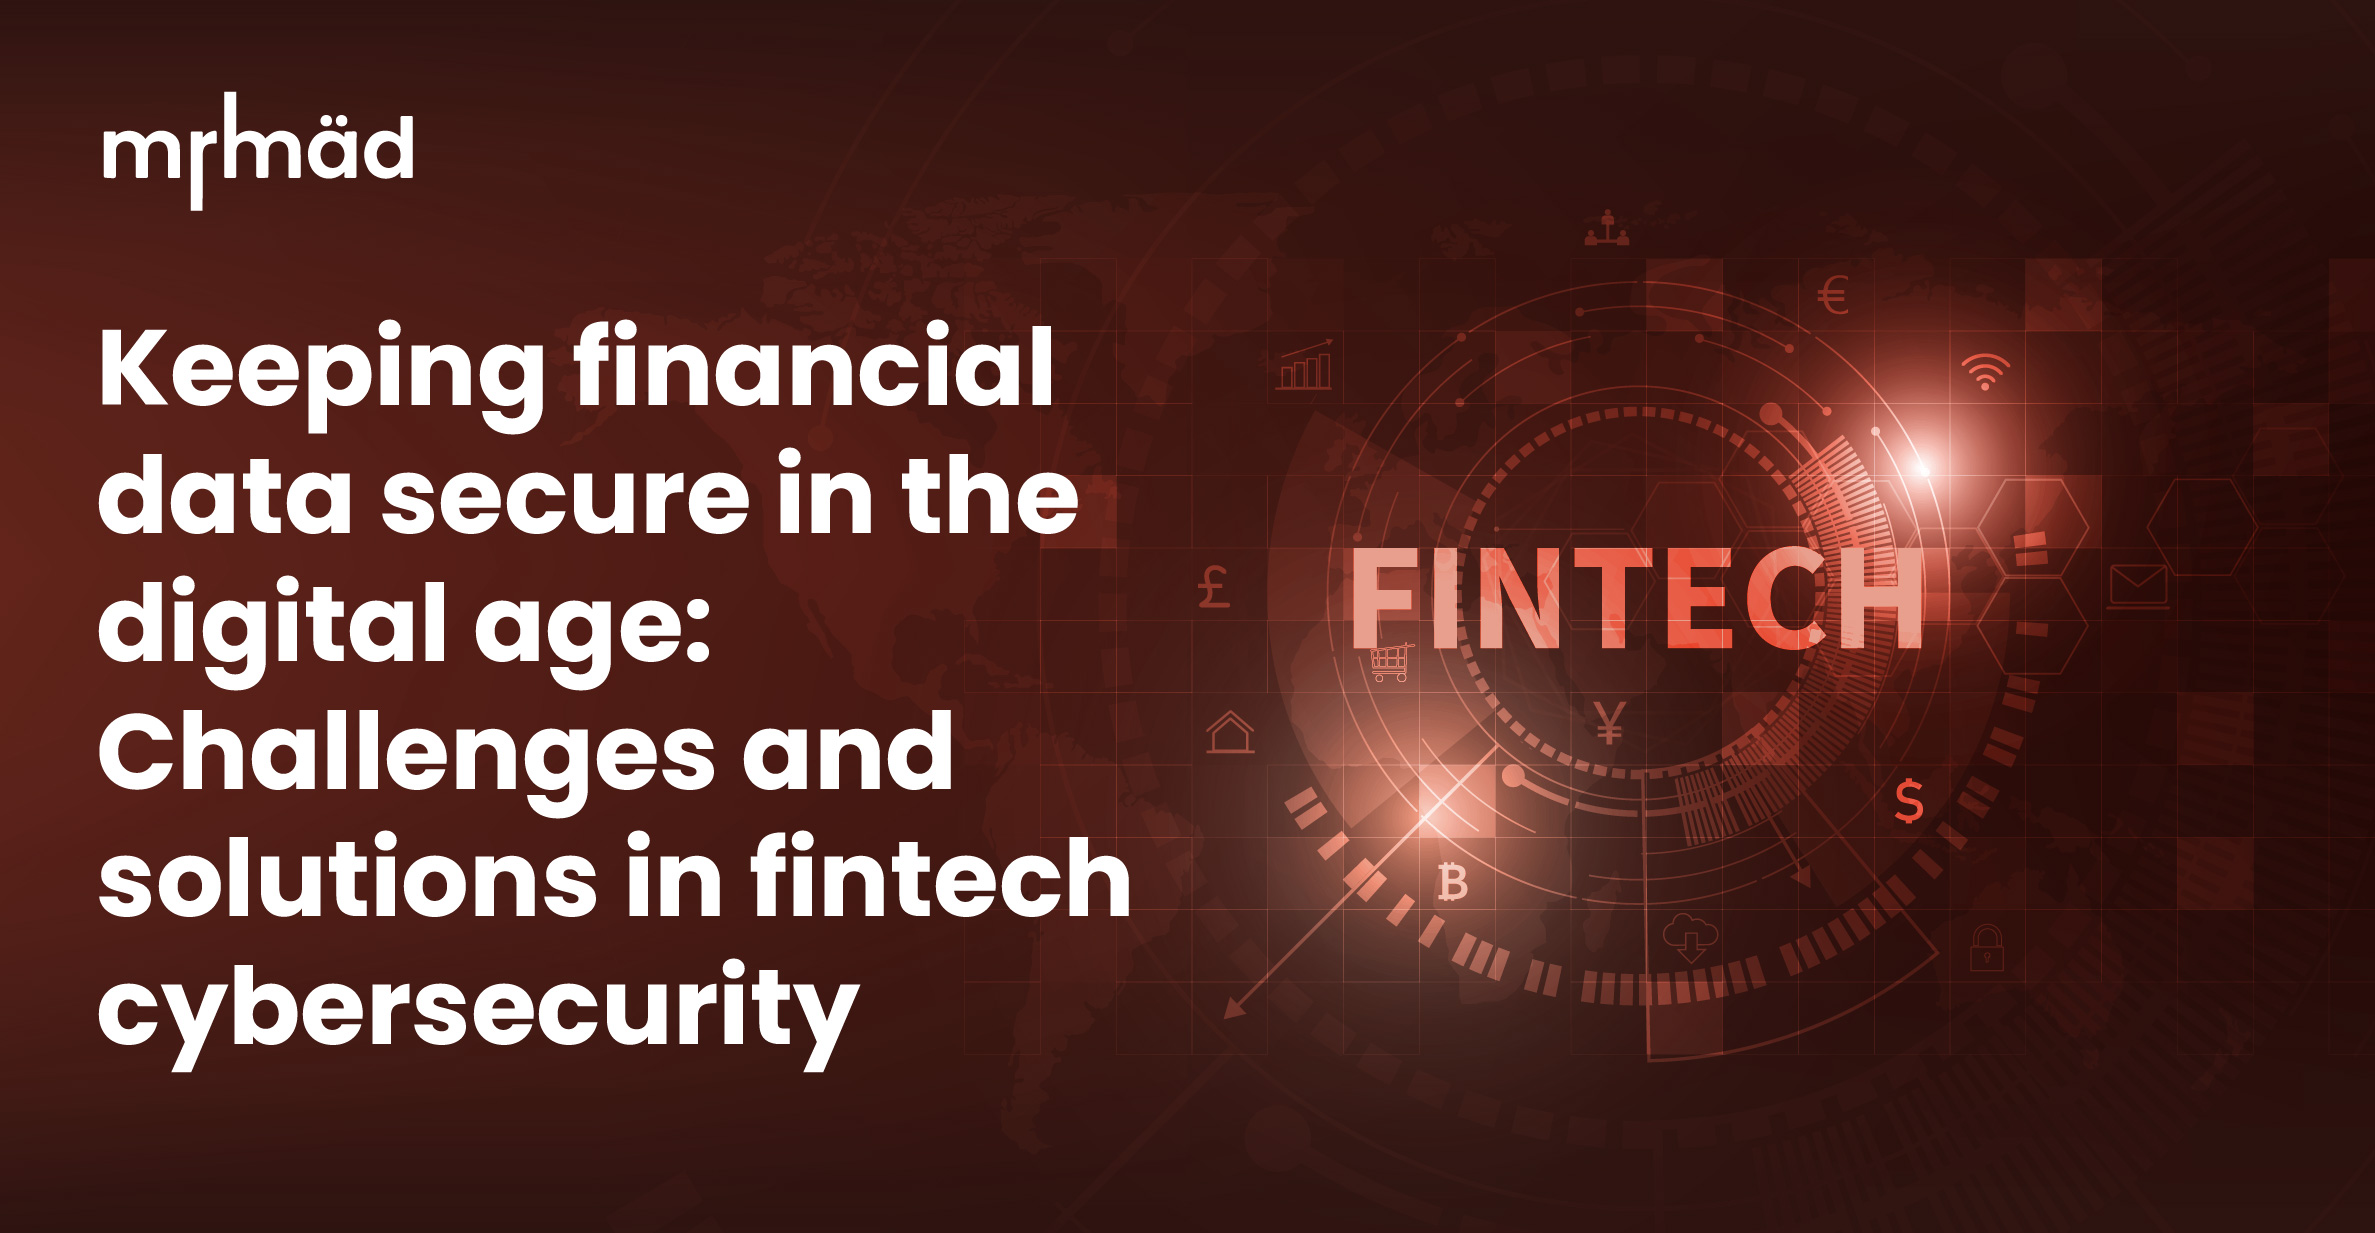 Keeping financial data secure in the digital age: Challenges and solutions in fintech cybersecurity